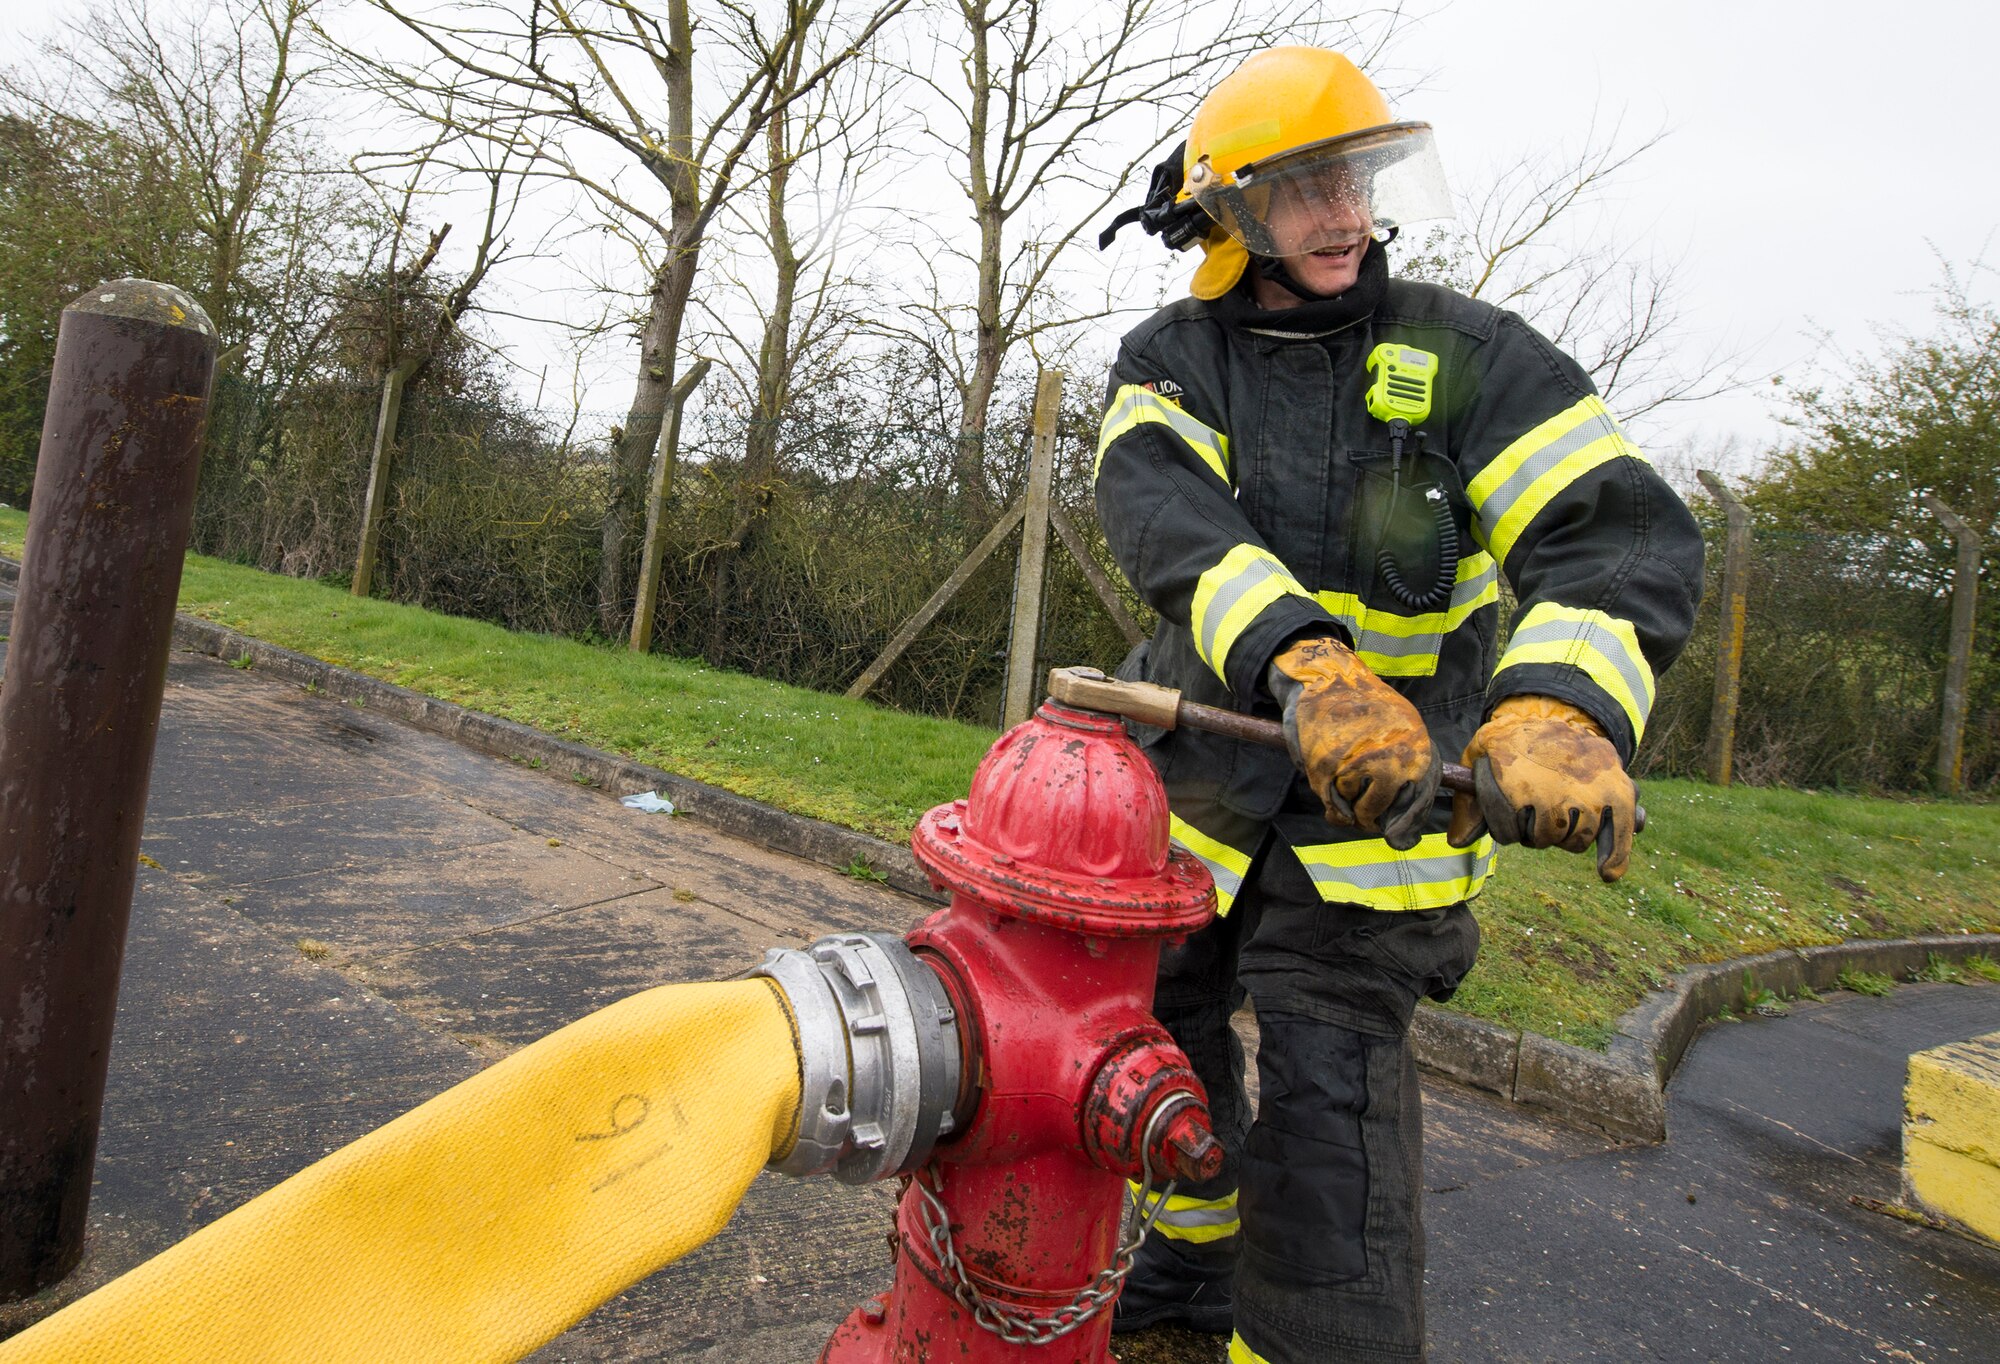 A firefighter with the 423rd Civil Engineer Squadron turns on a fire hydrant during confined spaces training at RAF Alconbury, England on March 30, 2020. This type of training helps the firefighters maintain readiness and stay proficient in their craft. (U.S. Air Force photo by Master Sgt. Brian Kimball)